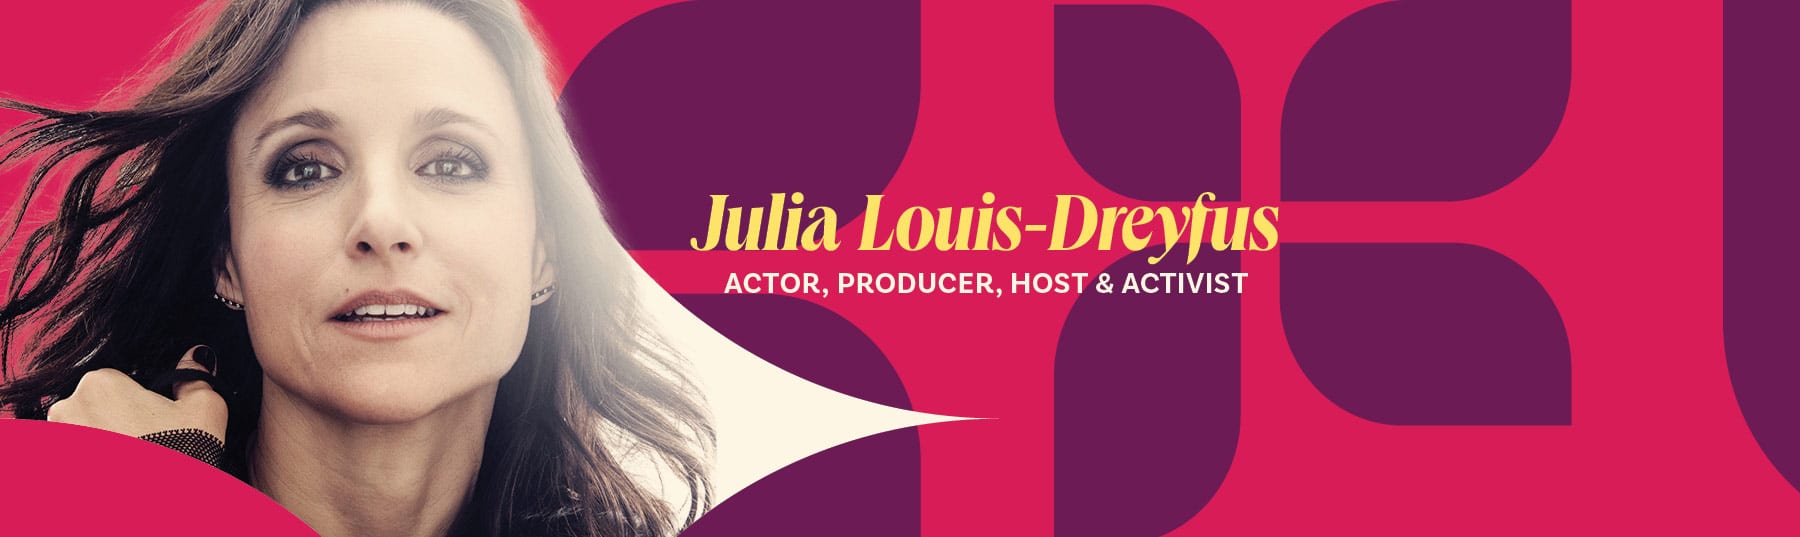 Join Julia Louis-Dreyfus at the Texas Conference for Women on October 2nd in Austin, TX!